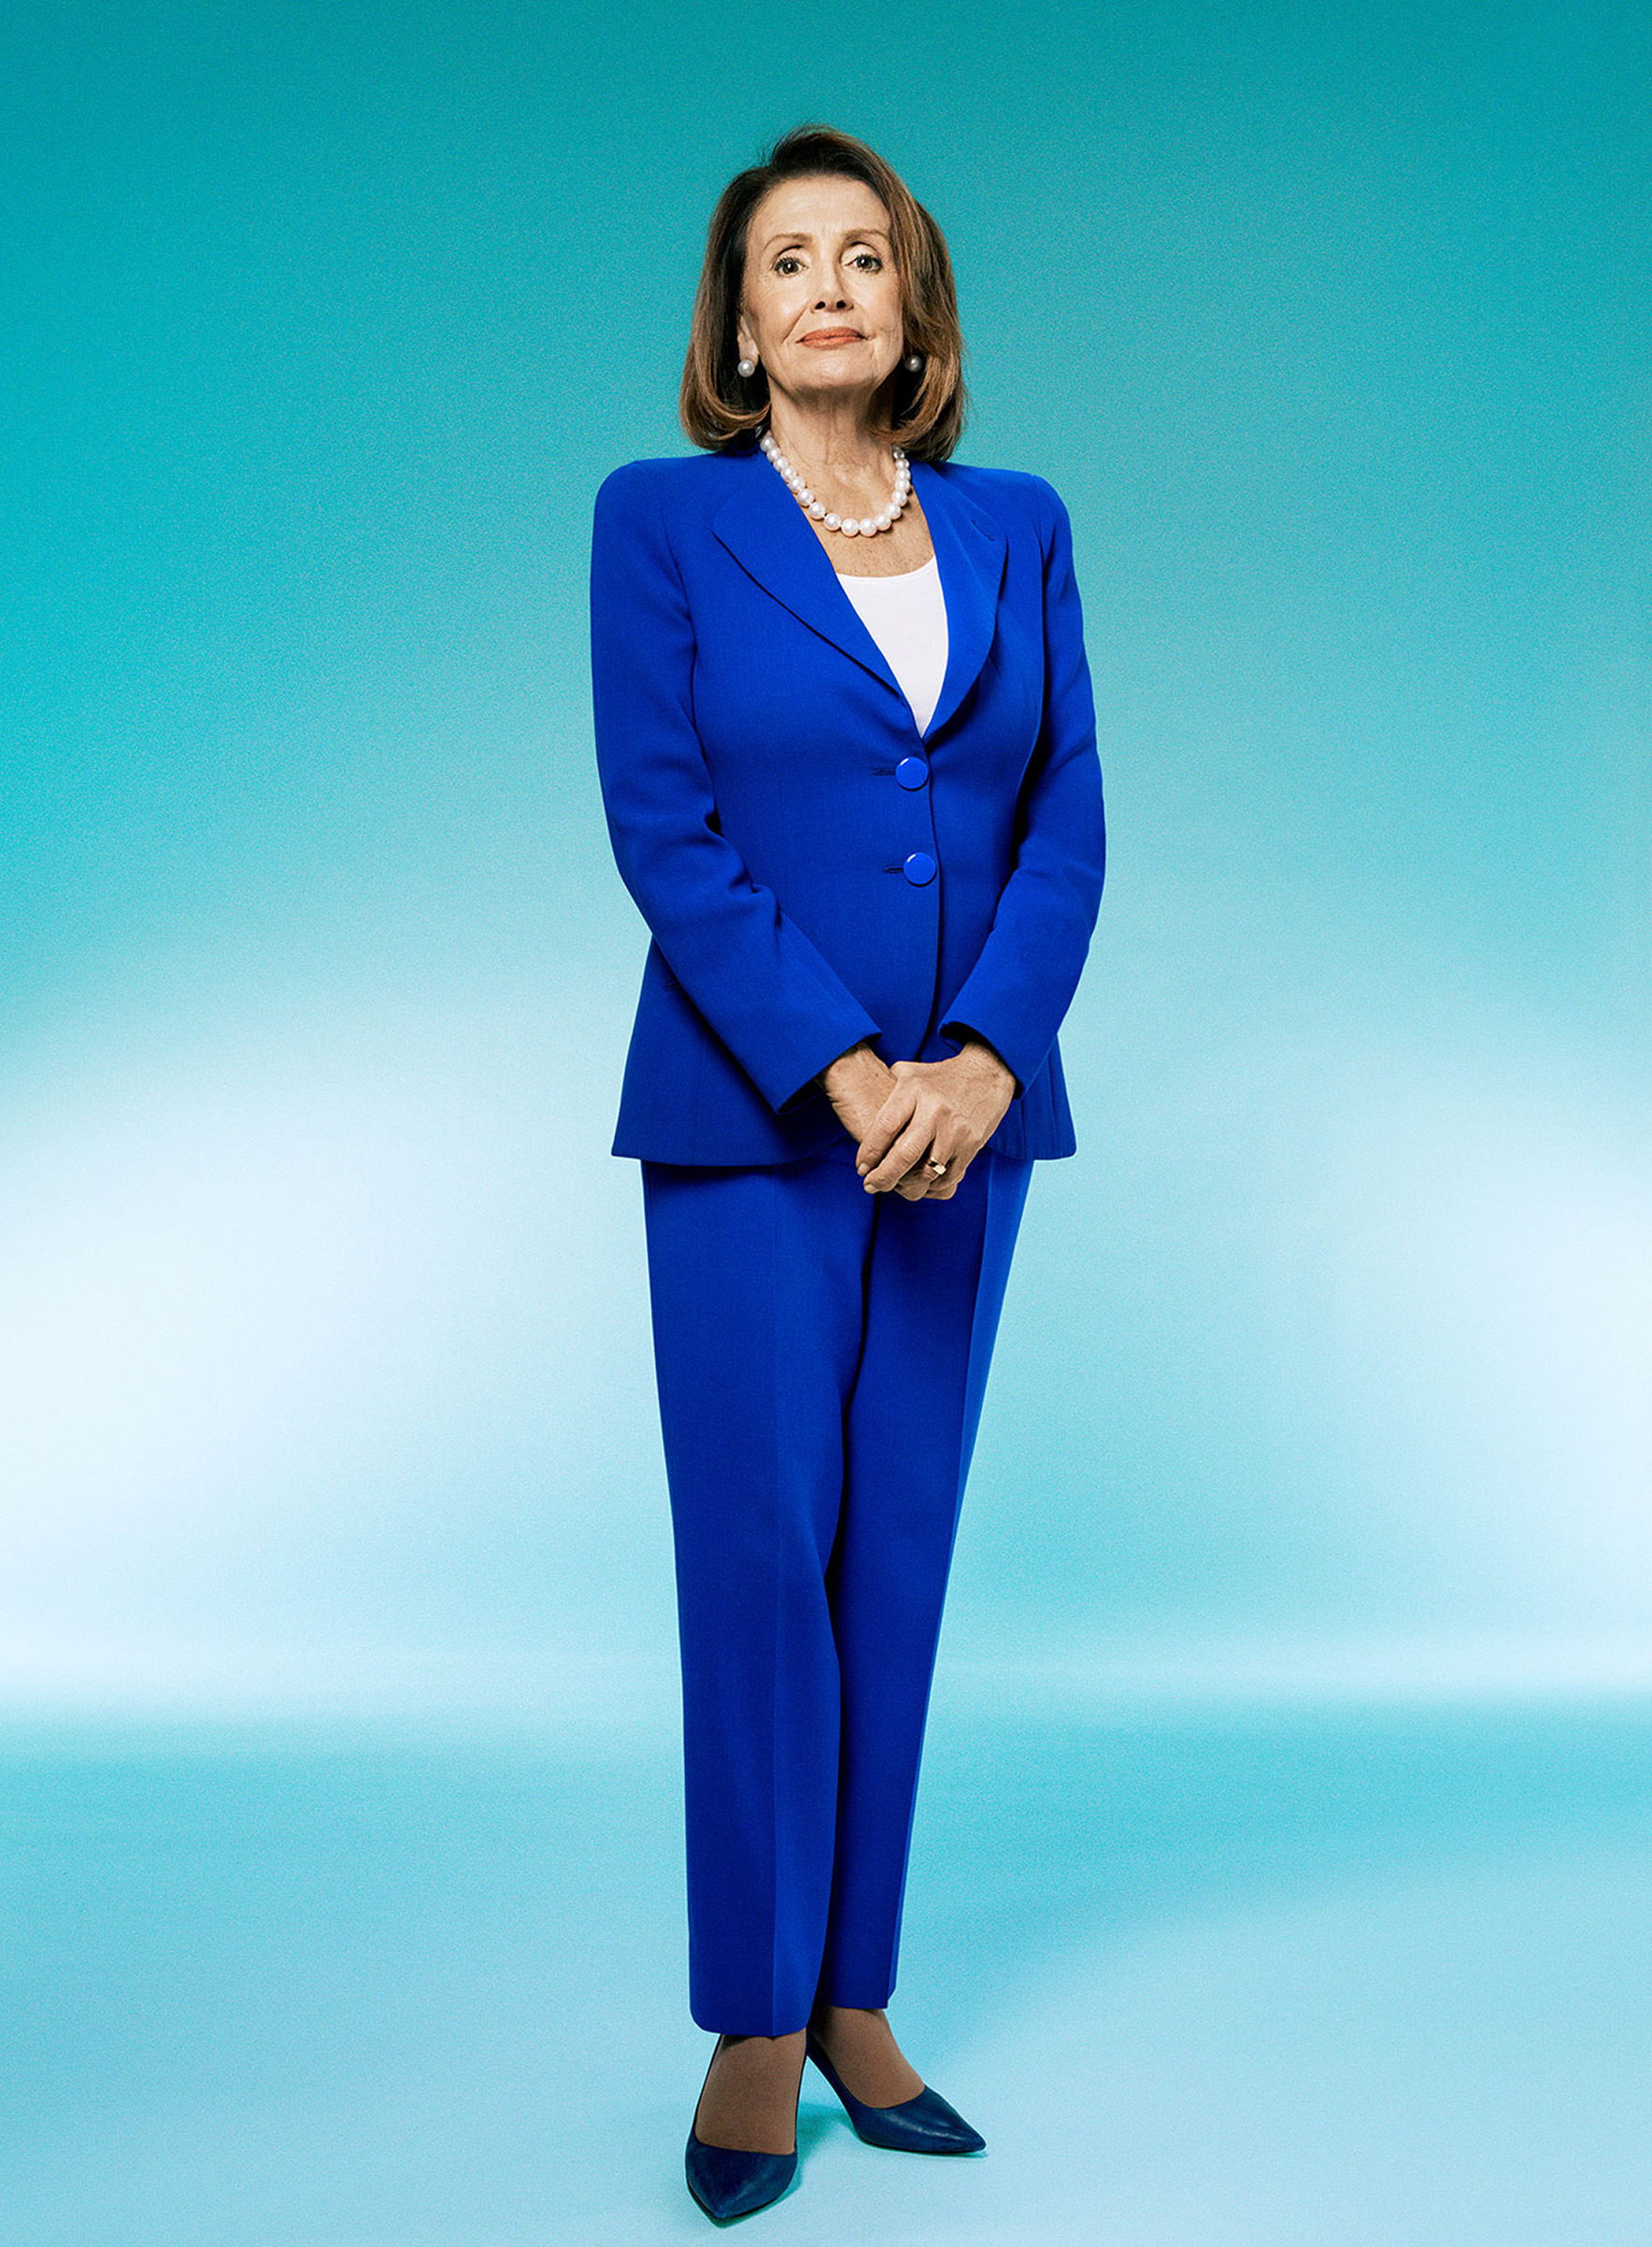 Nancy Pelosi. "TIME 100 Most Influential People," April 29 issue. (Pari Dukovic for TIME)